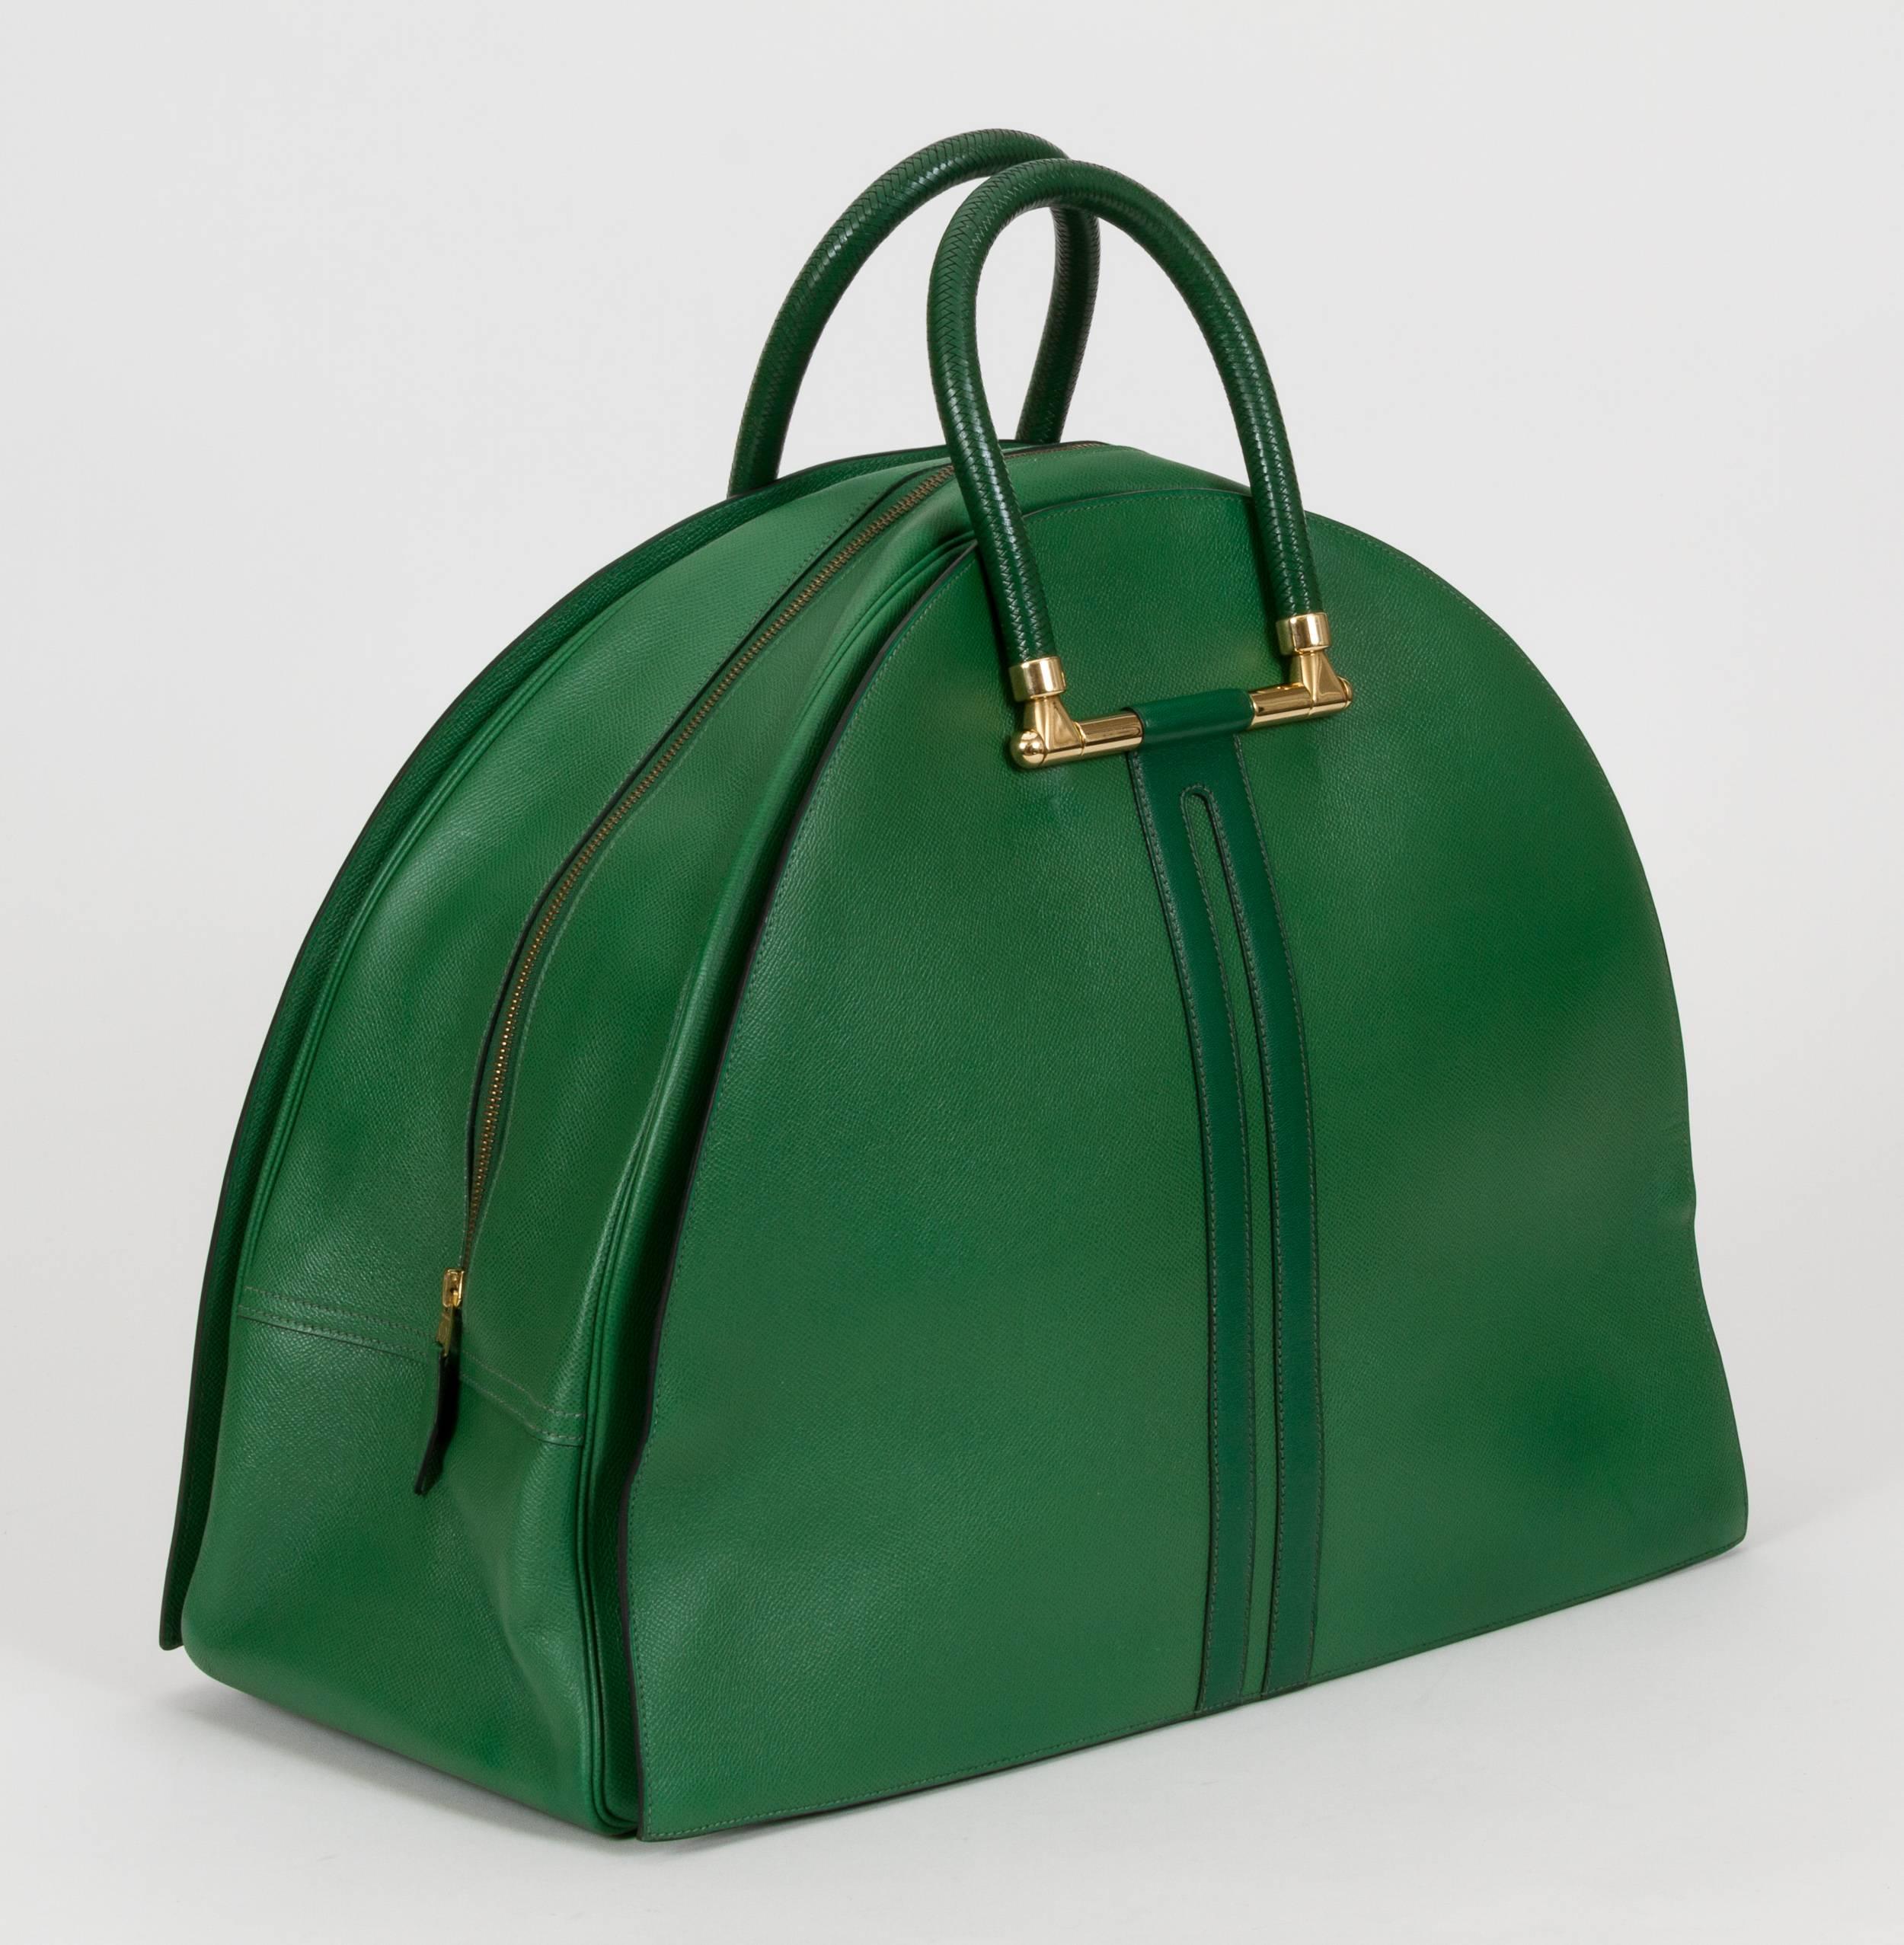 Hermès oversize handbag in bengale green Epsom leather with woven handles in a darker shade of green. Handle drop, 4